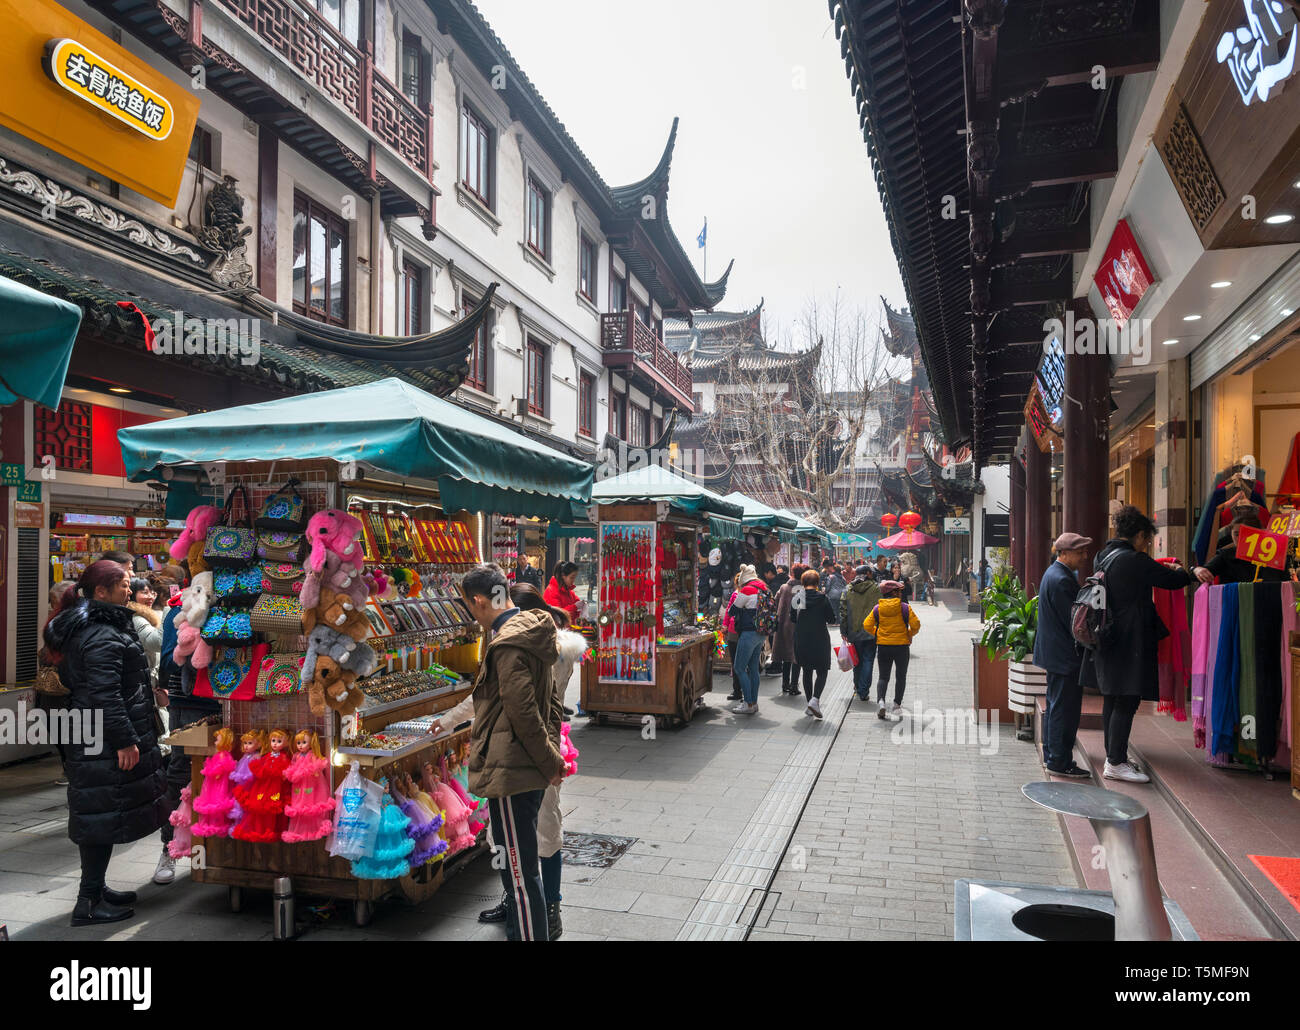 Shops, stalls and restaurants in the Yuyuan Bazaar, Old City, Shanghai, China Stock Photo